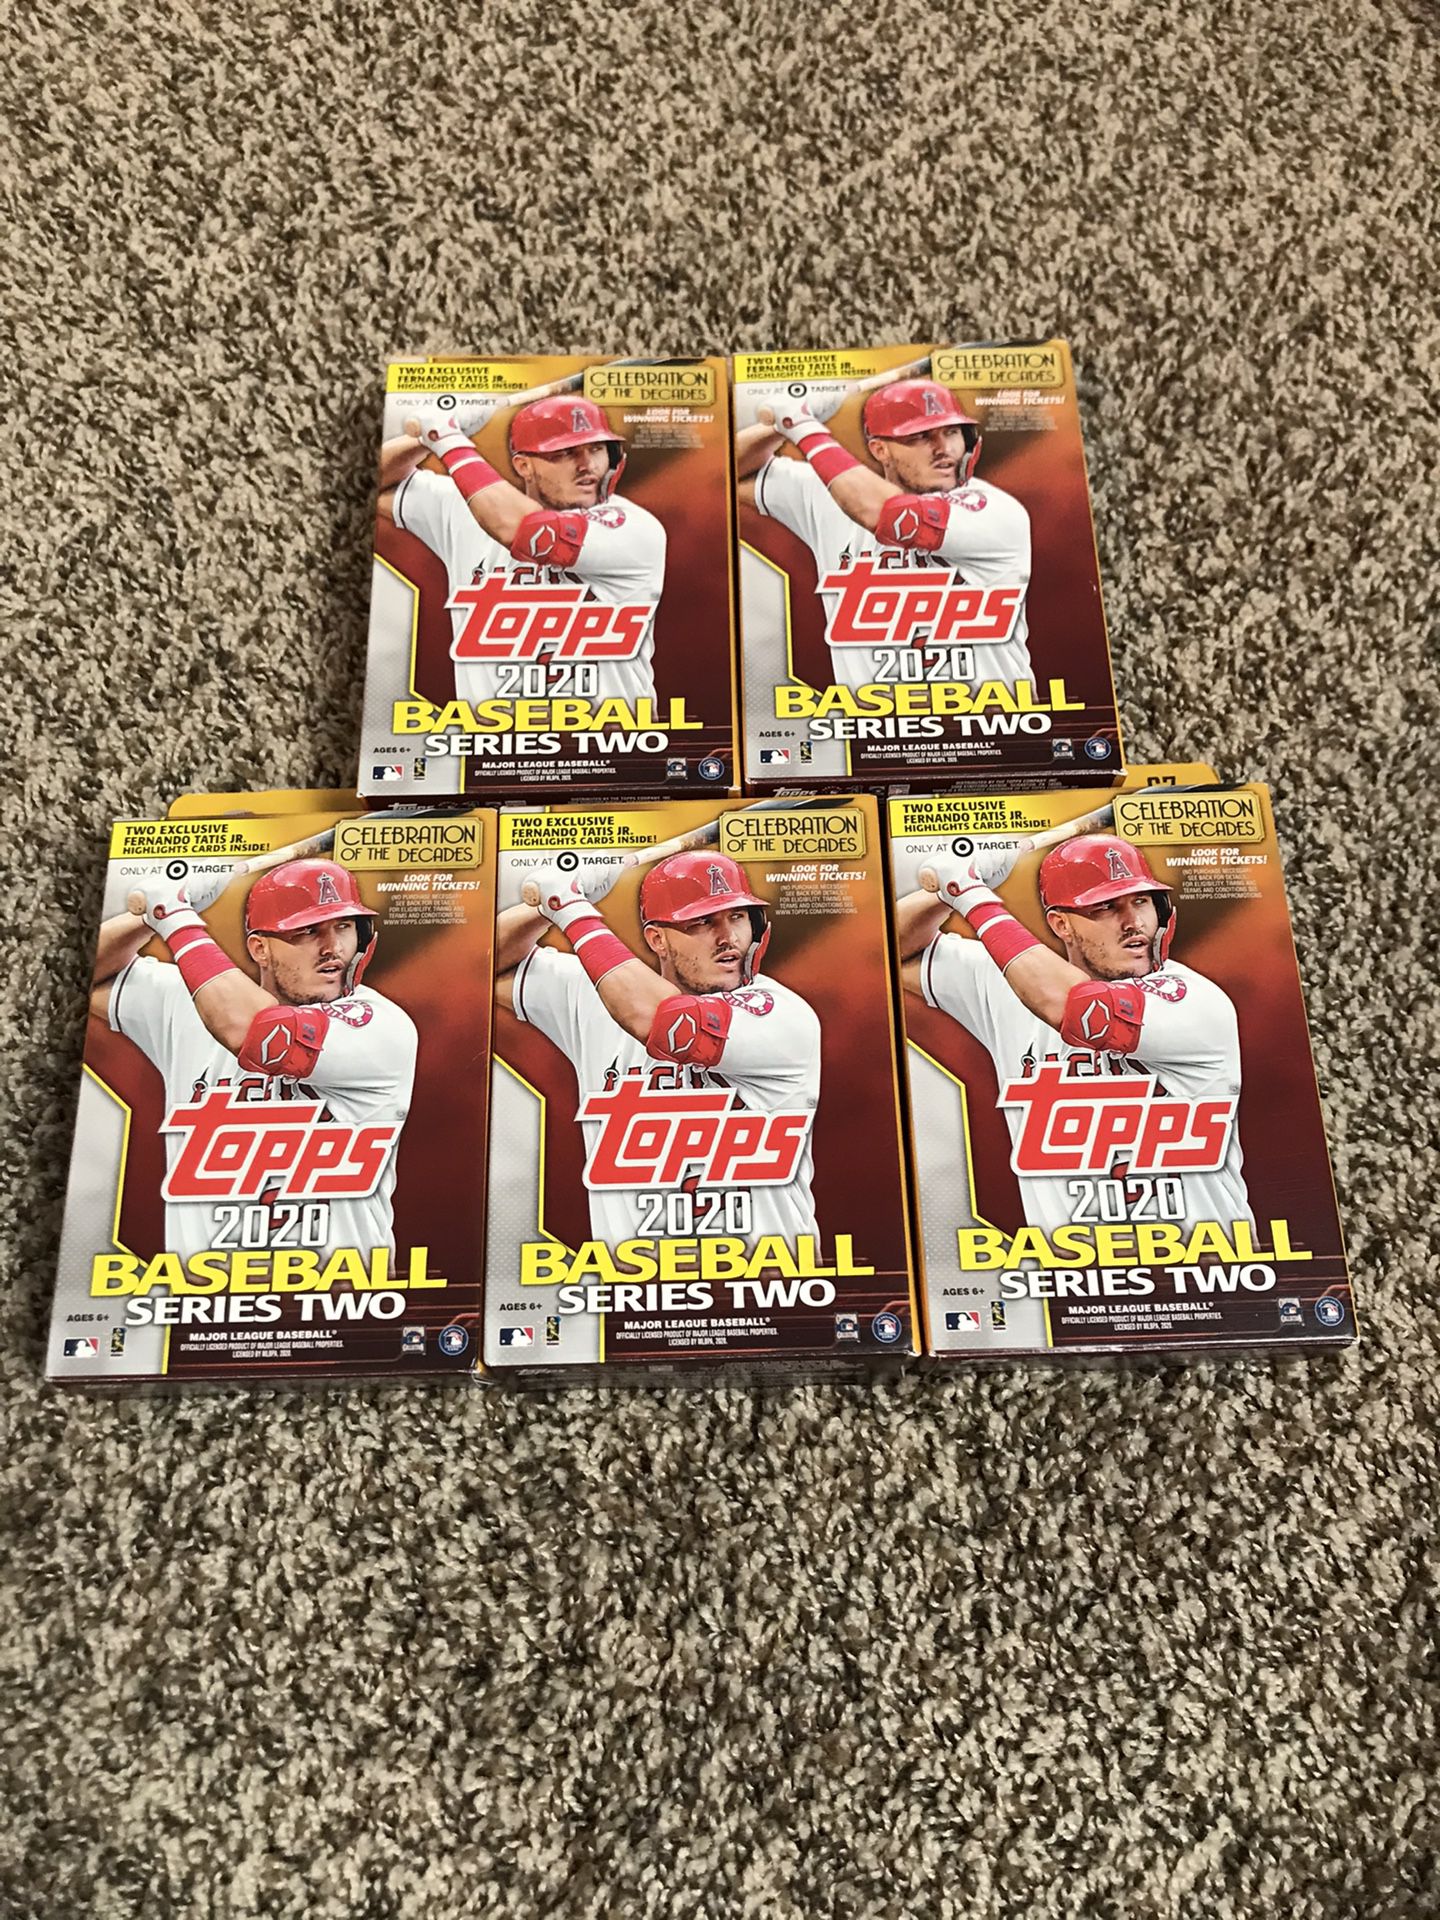 Lot of 5 2020 Topps Baseball Series 2 Factory Sealed 67 Card Hanger Box Possible Autos. Condition is Brand New.